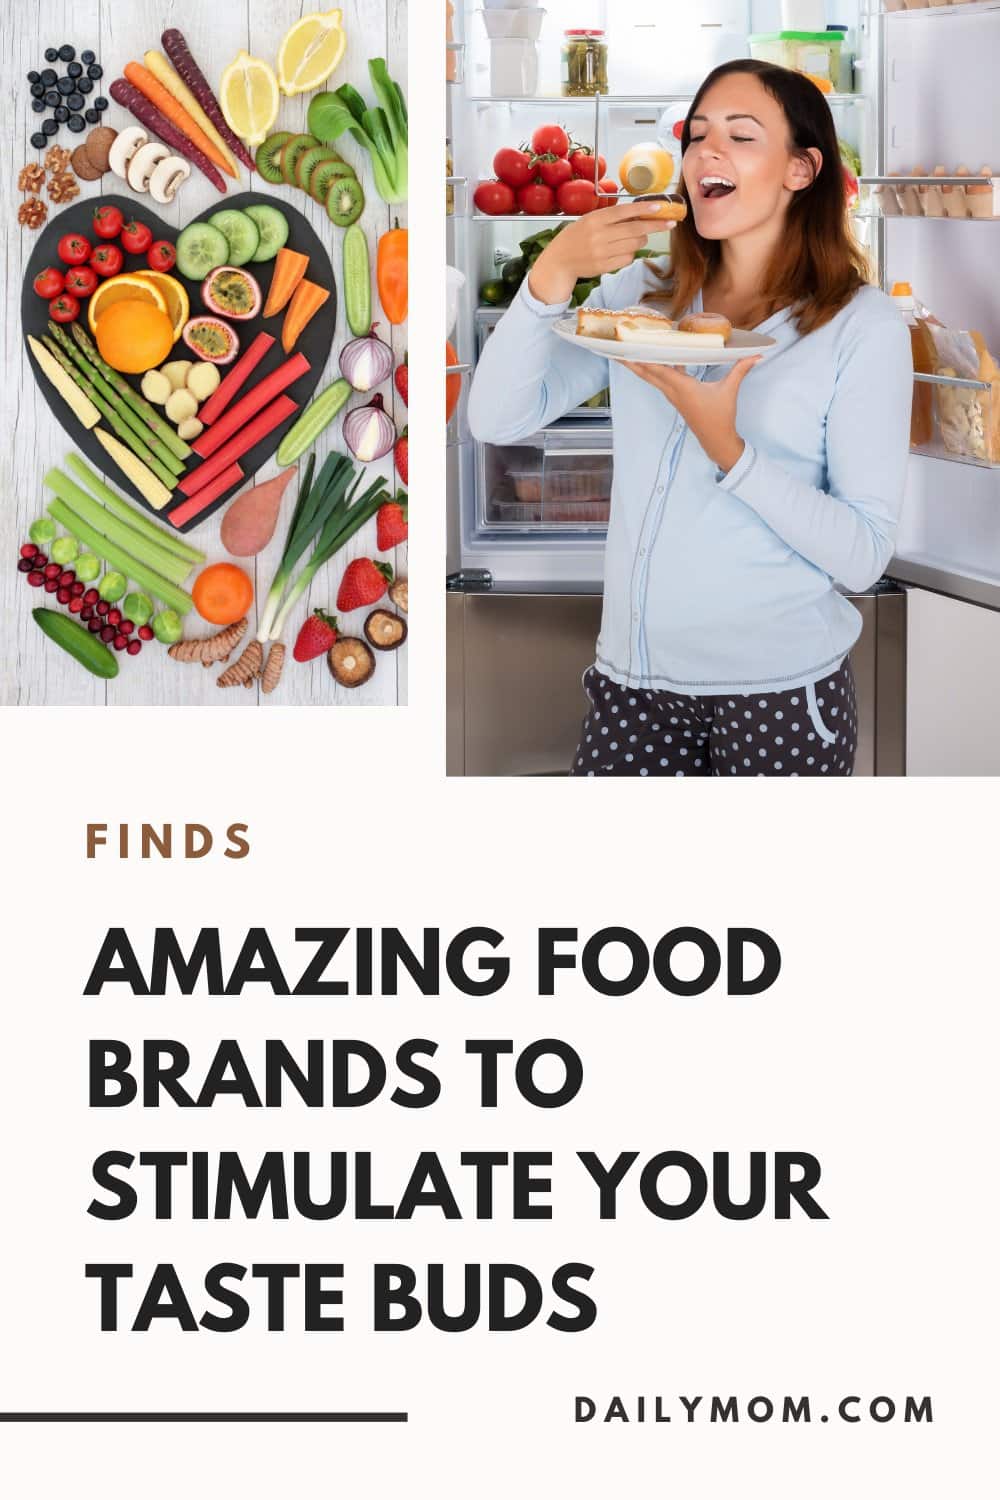 26 Amazing Food Brands To Stimulate Your Taste Buds 49 Daily Mom, Magazine For Families